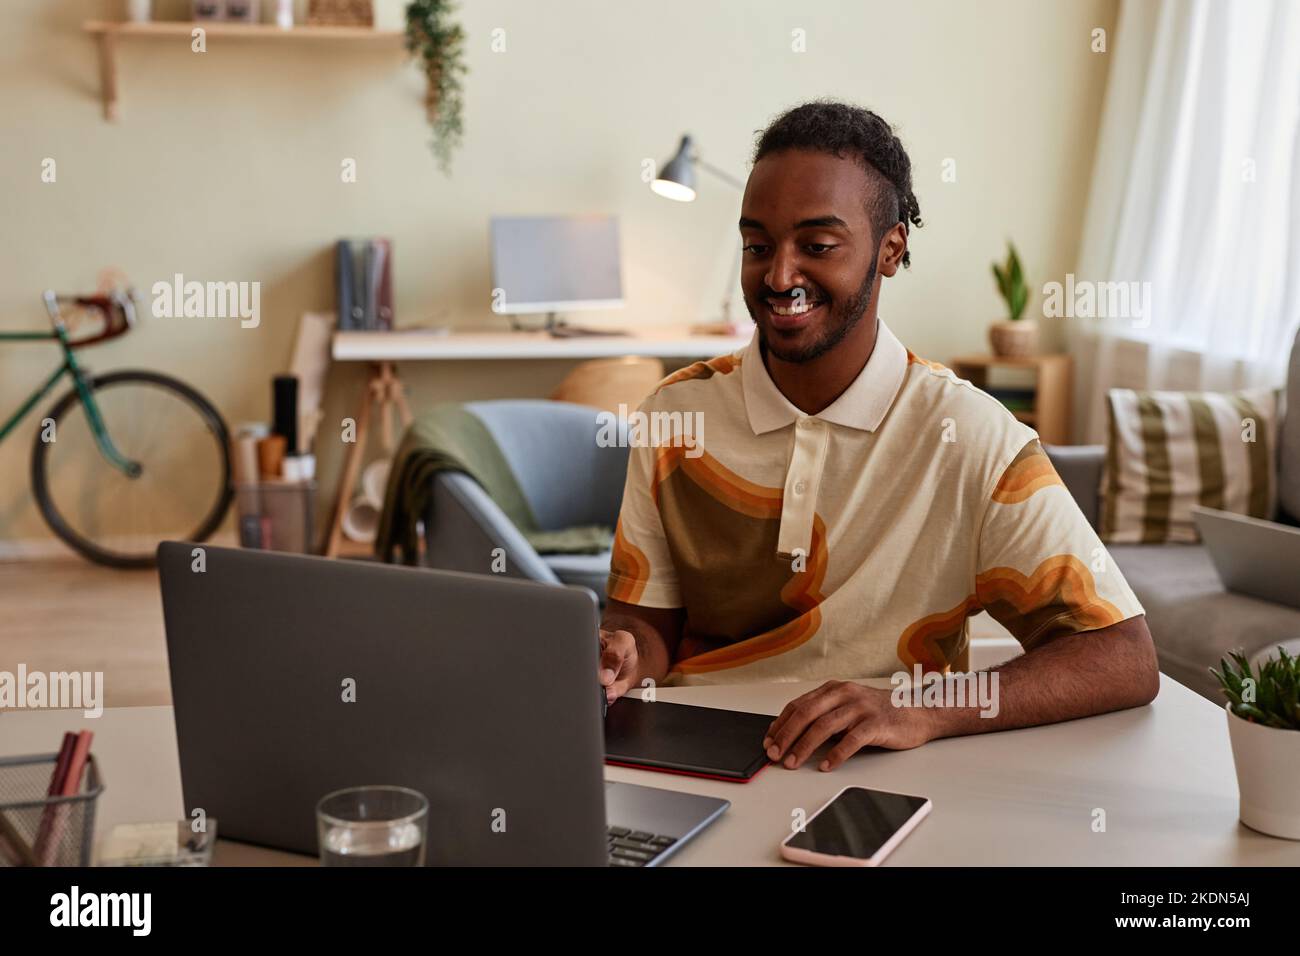 Portrait of smiling black man using pen tablet at home office workplace for digital design or photo editing Stock Photo